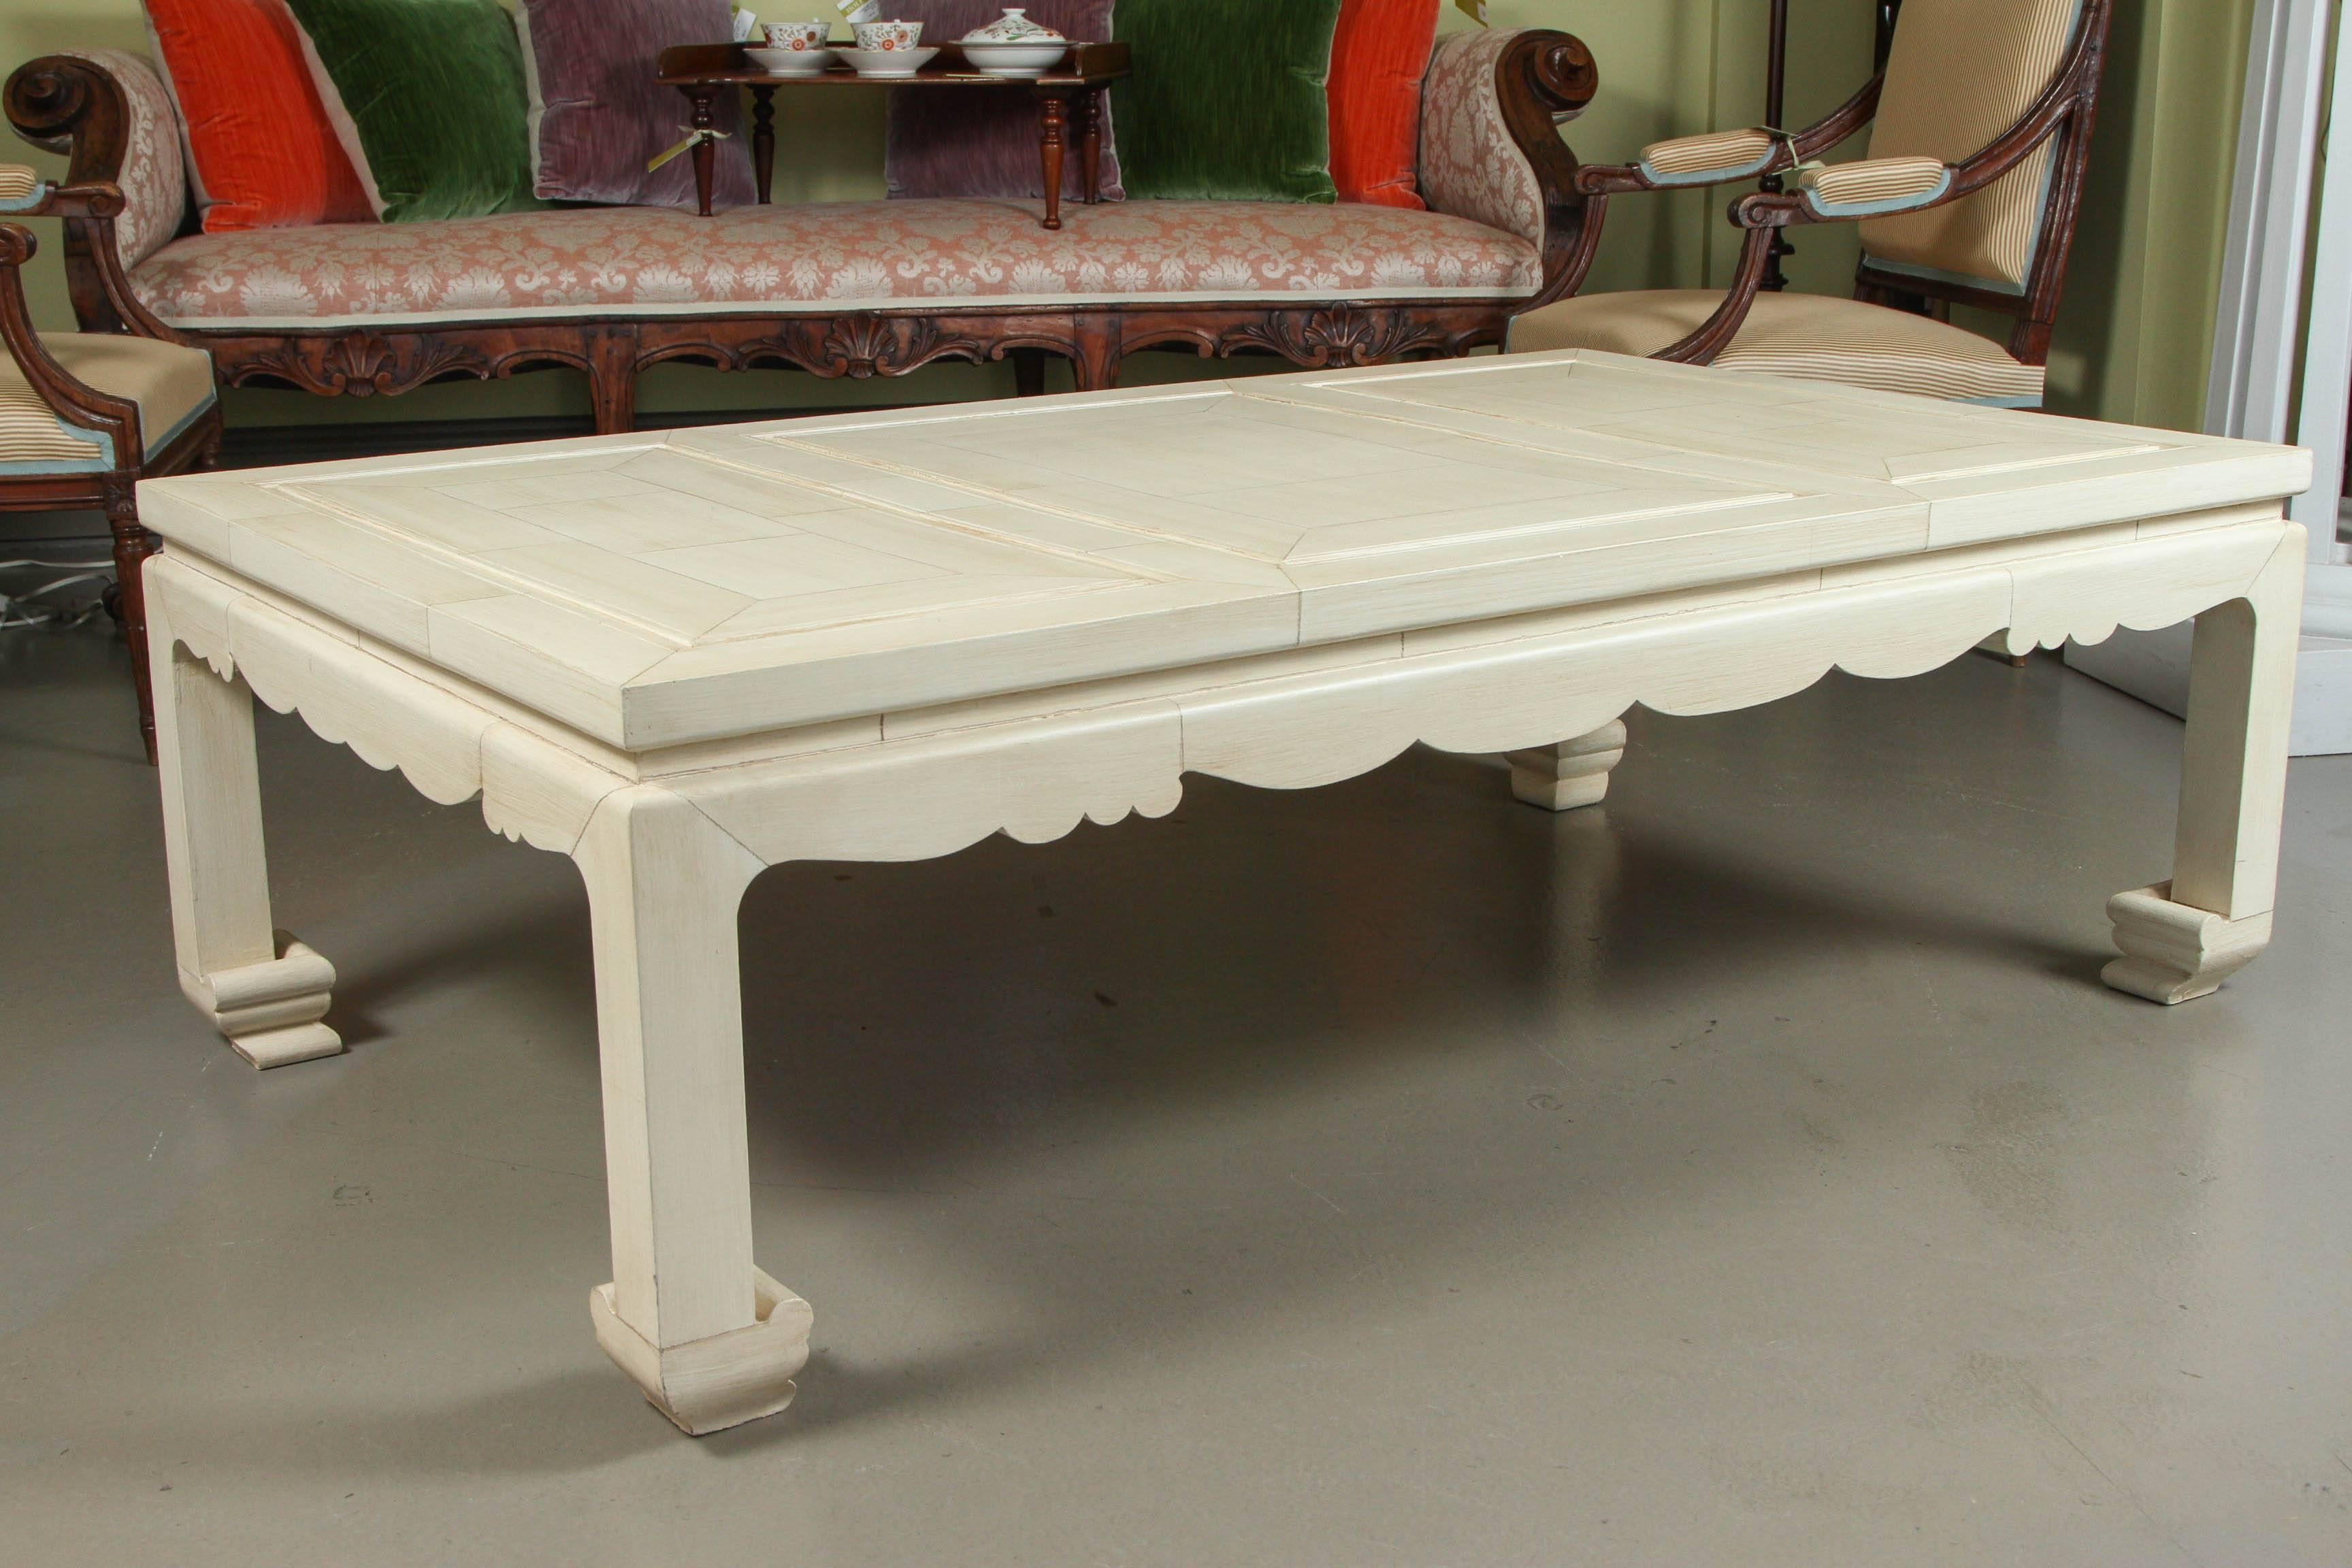 A Vintage Ming-Style Coffee Table with a Faux Ivory Inlay Finish 3